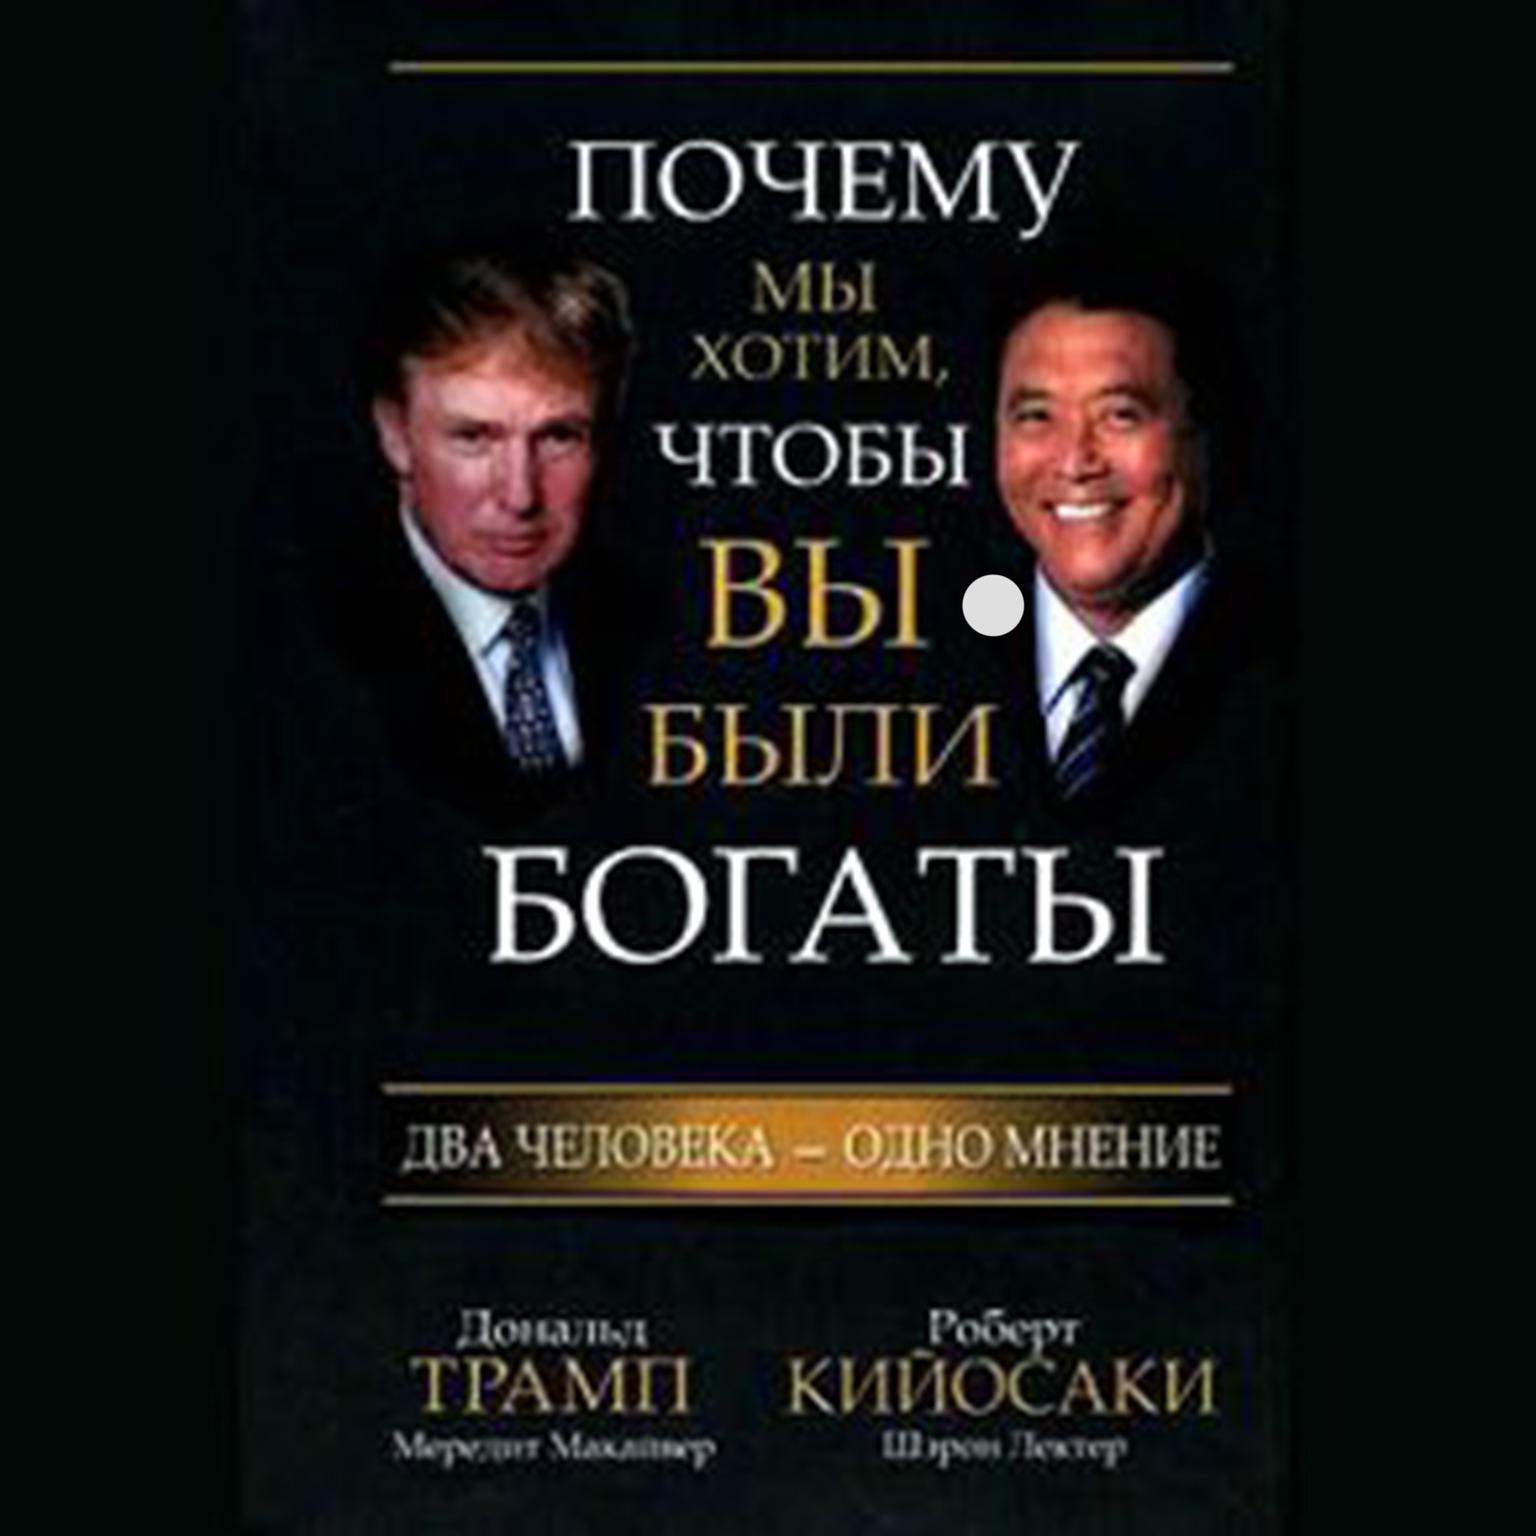 Why We Want You to Be Rich: Two Men, One Message [Russian Edition] Audiobook, by Donald J. Trump